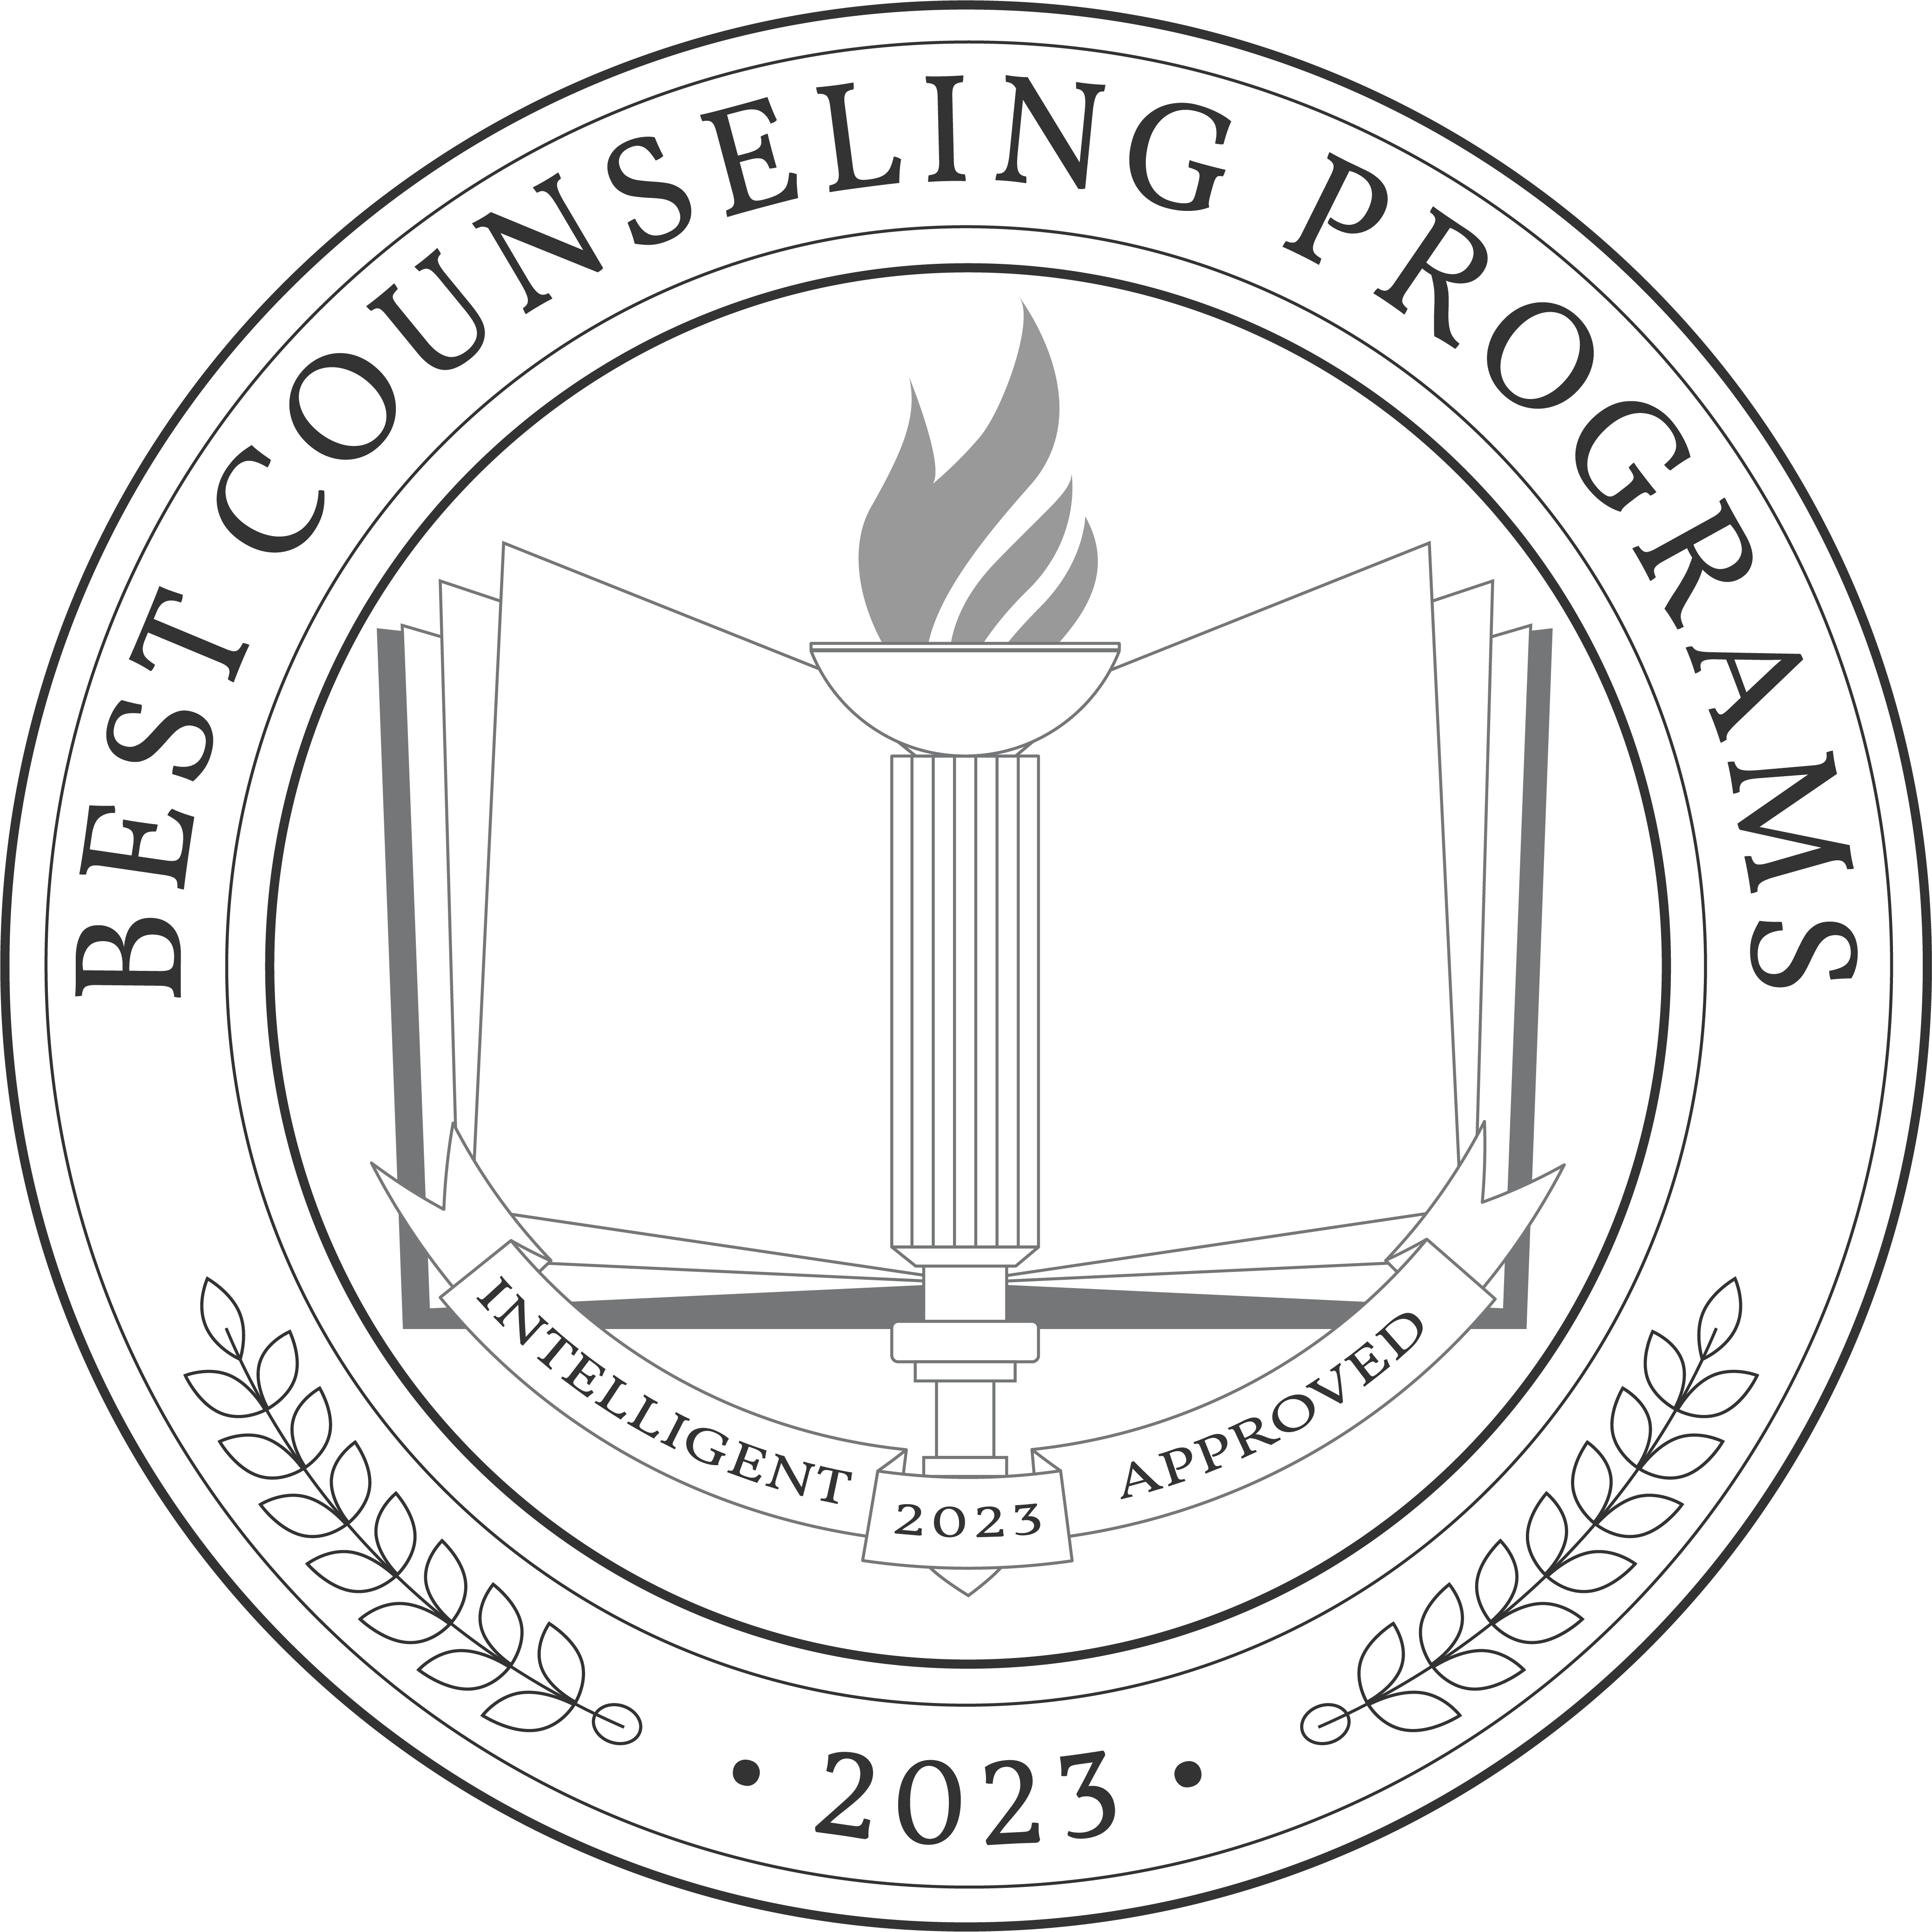 Best Counseling Programs badge